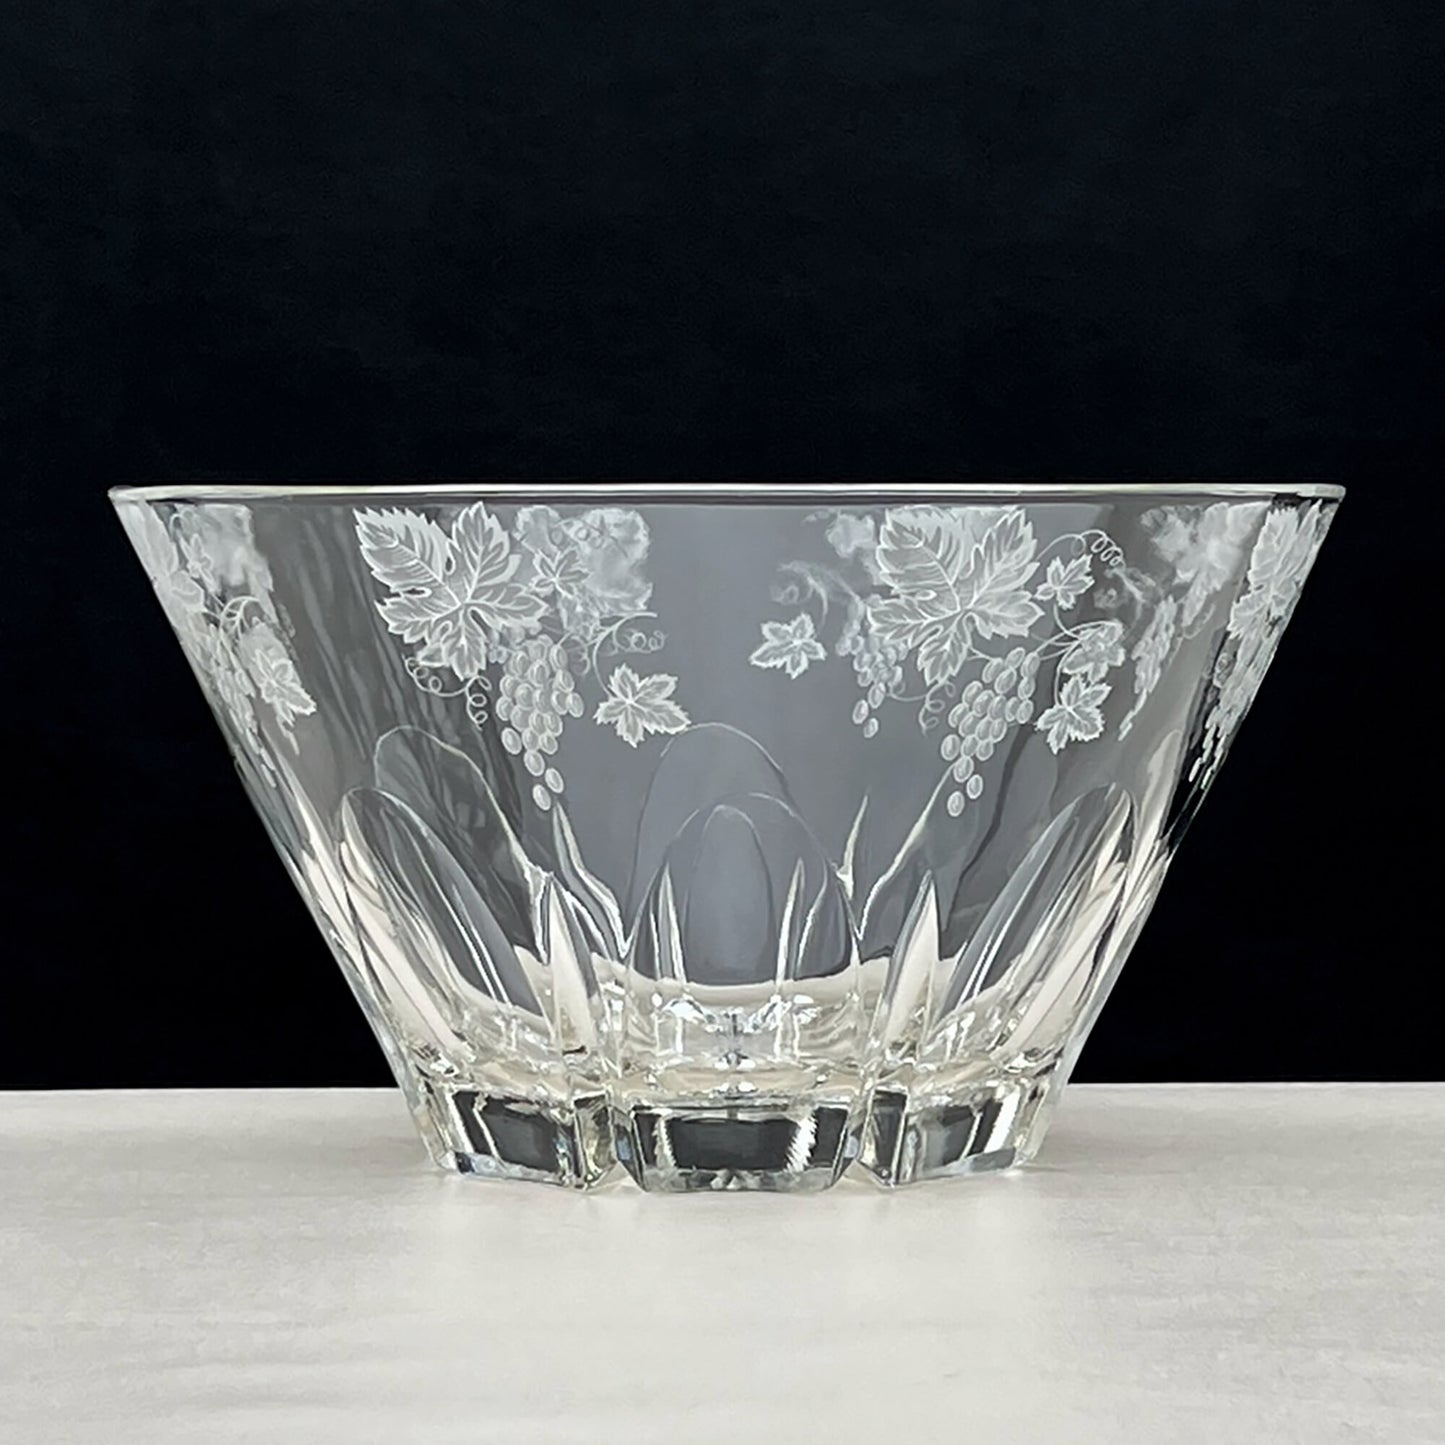 Jav6 by JAVIT Lead Crystal Serving Bowl, White Etched Grapes and Leaves, 9.75-in